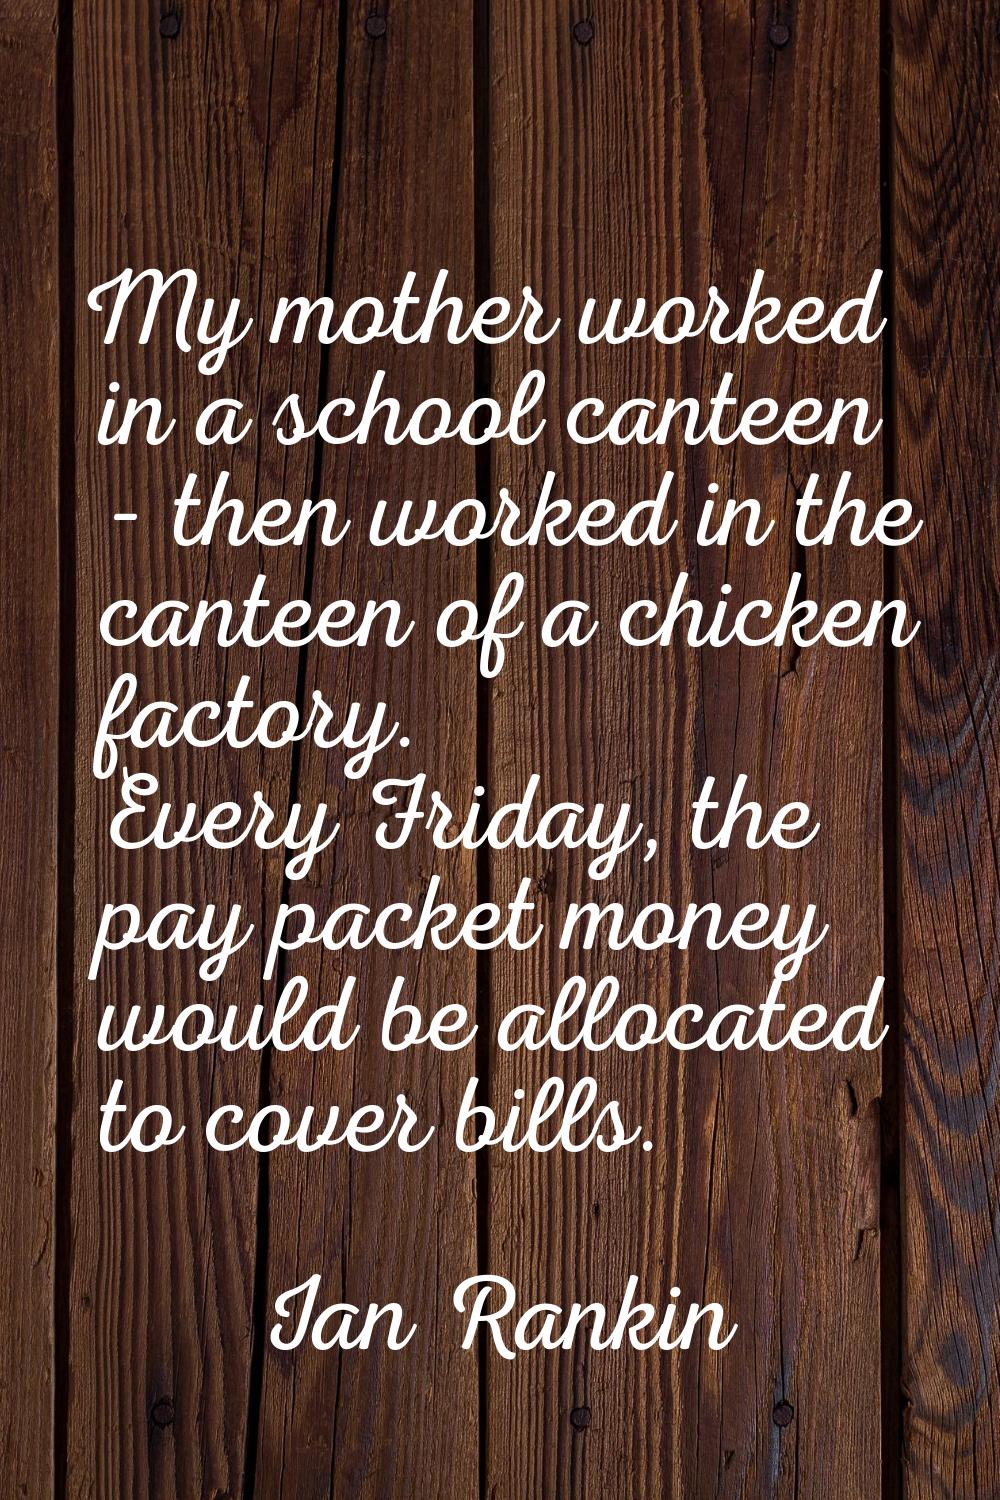 My mother worked in a school canteen - then worked in the canteen of a chicken factory. Every Frida